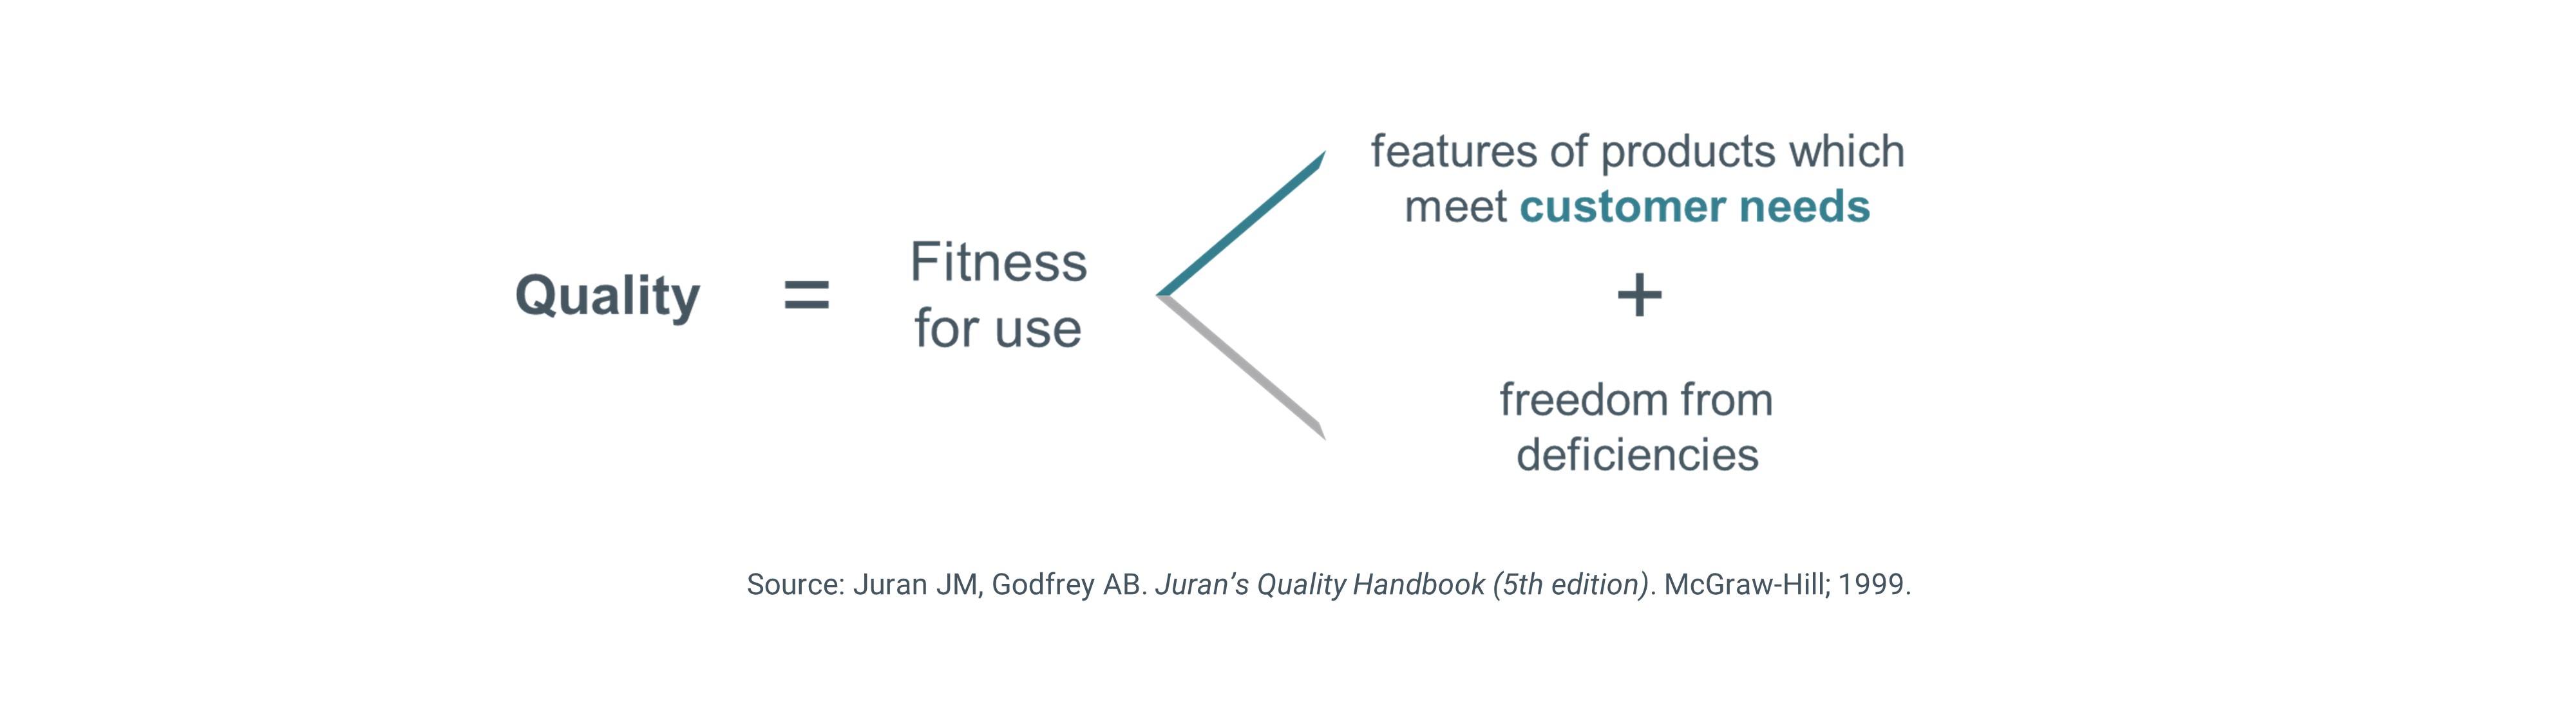 Juran's definition of quality